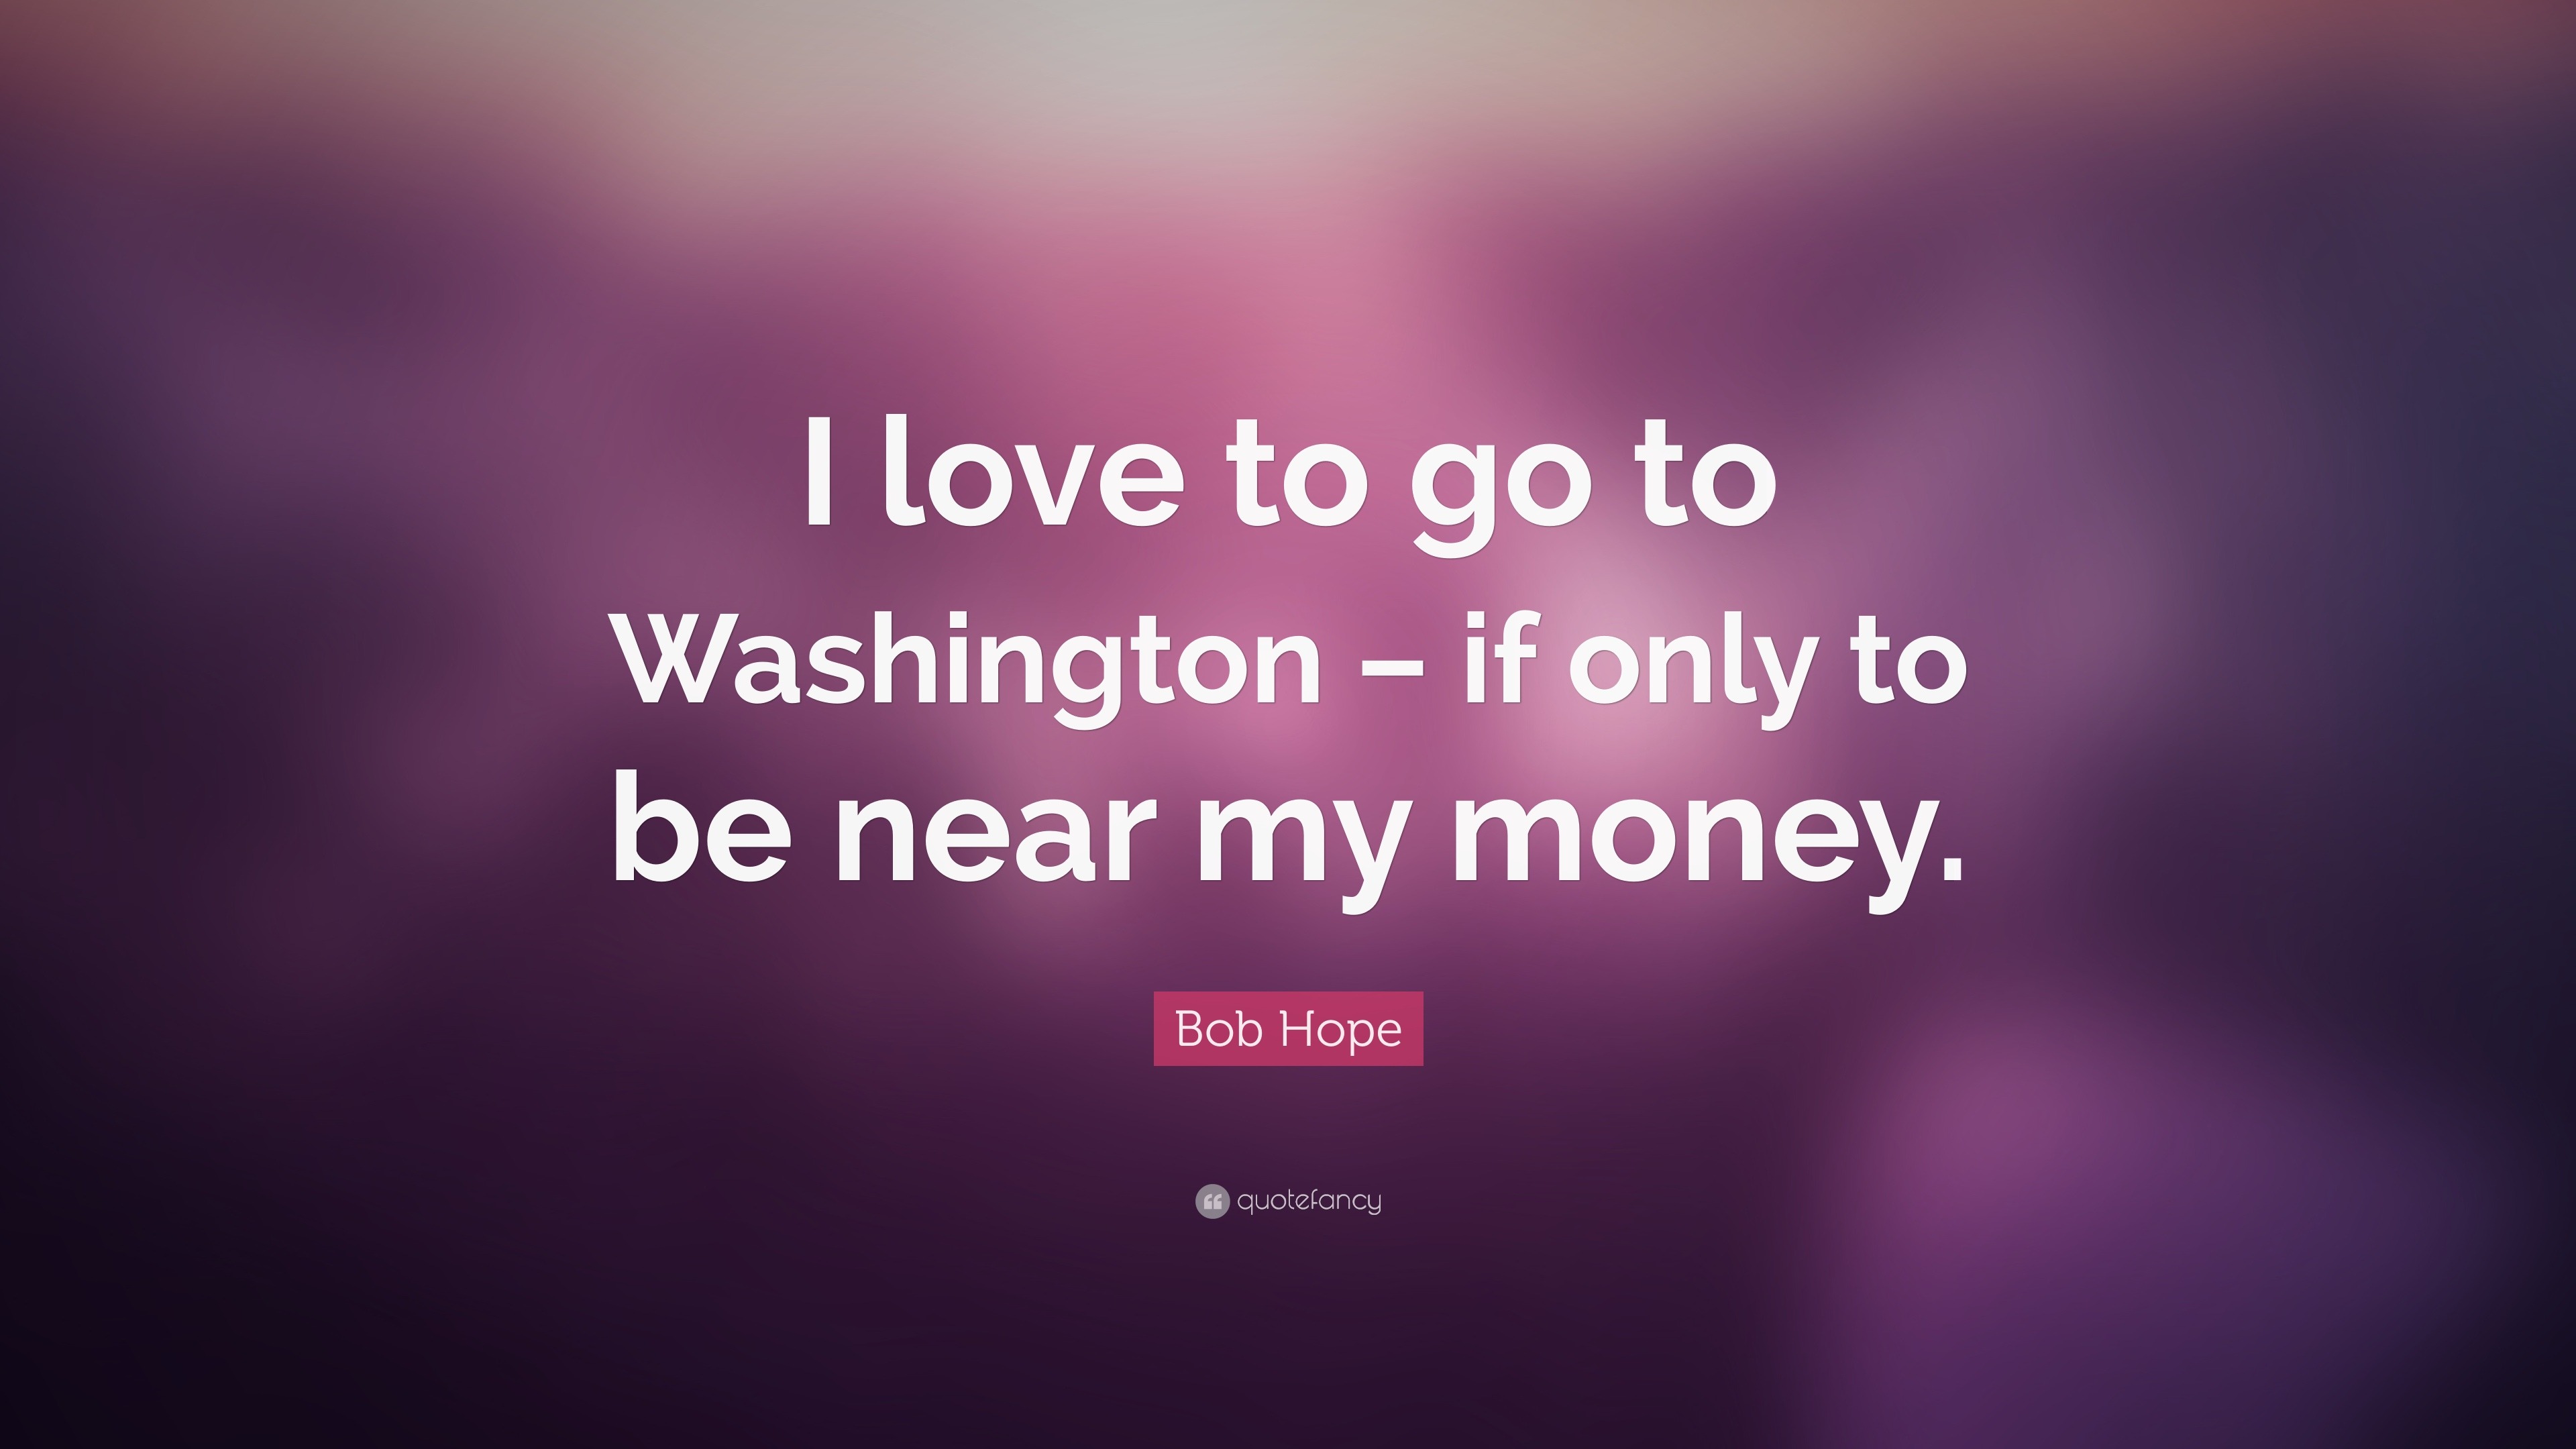 Bob Hope Quote: “I love to go to Washington – if only to be near